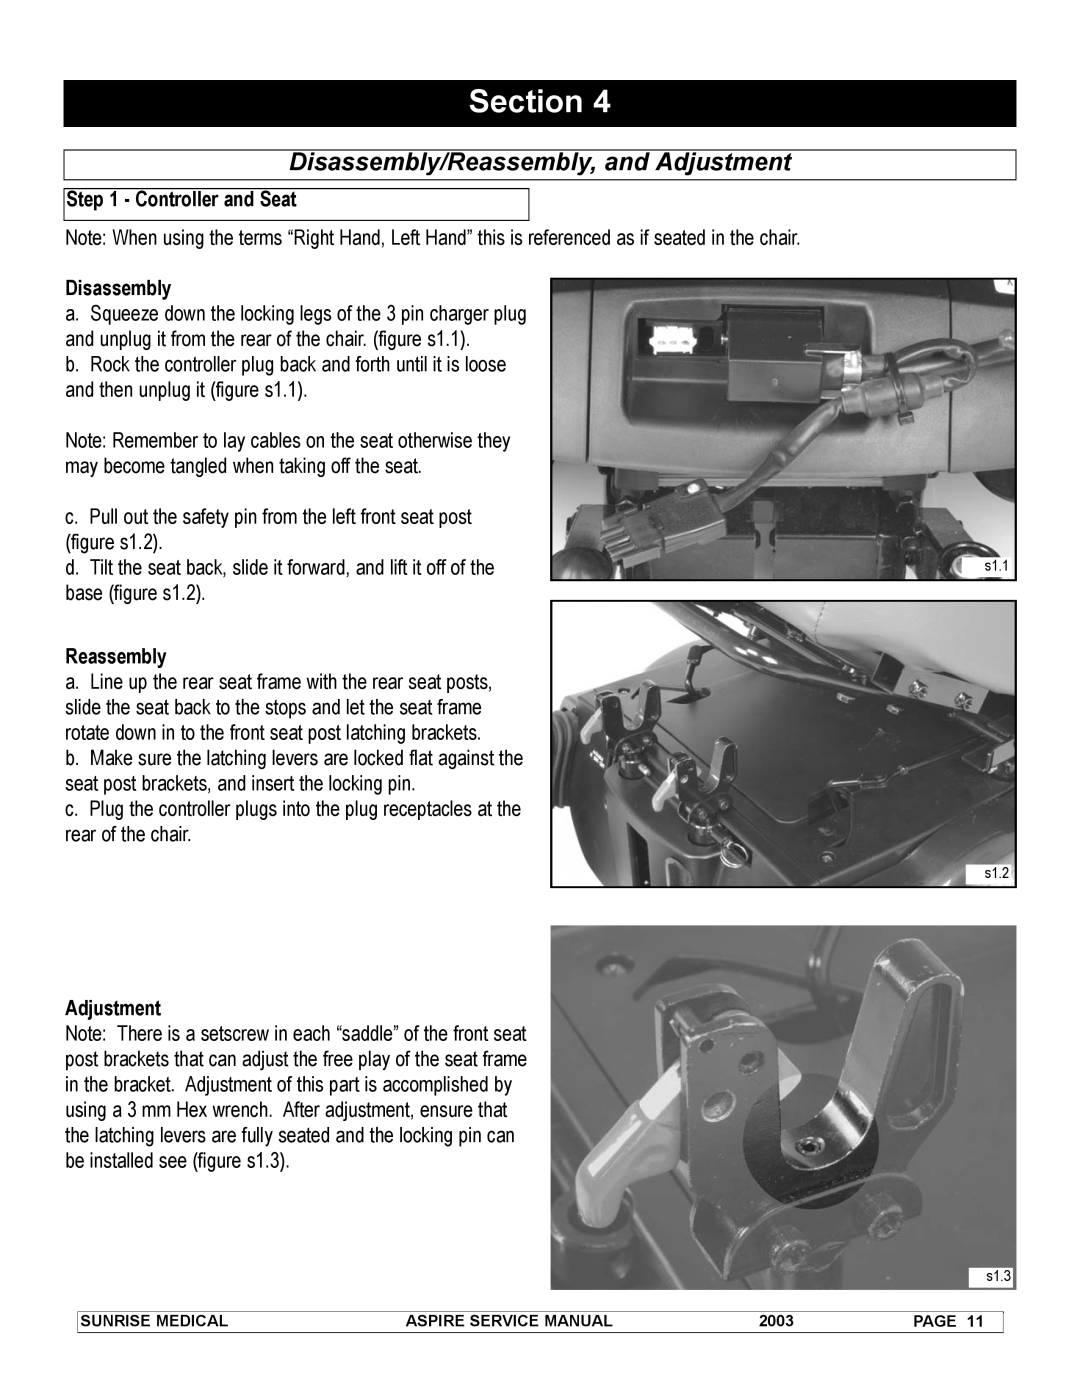 Sunrise Medical 931157 service manual Section, Disassembly/Reassembly, and Adjustment, Controller and Seat 